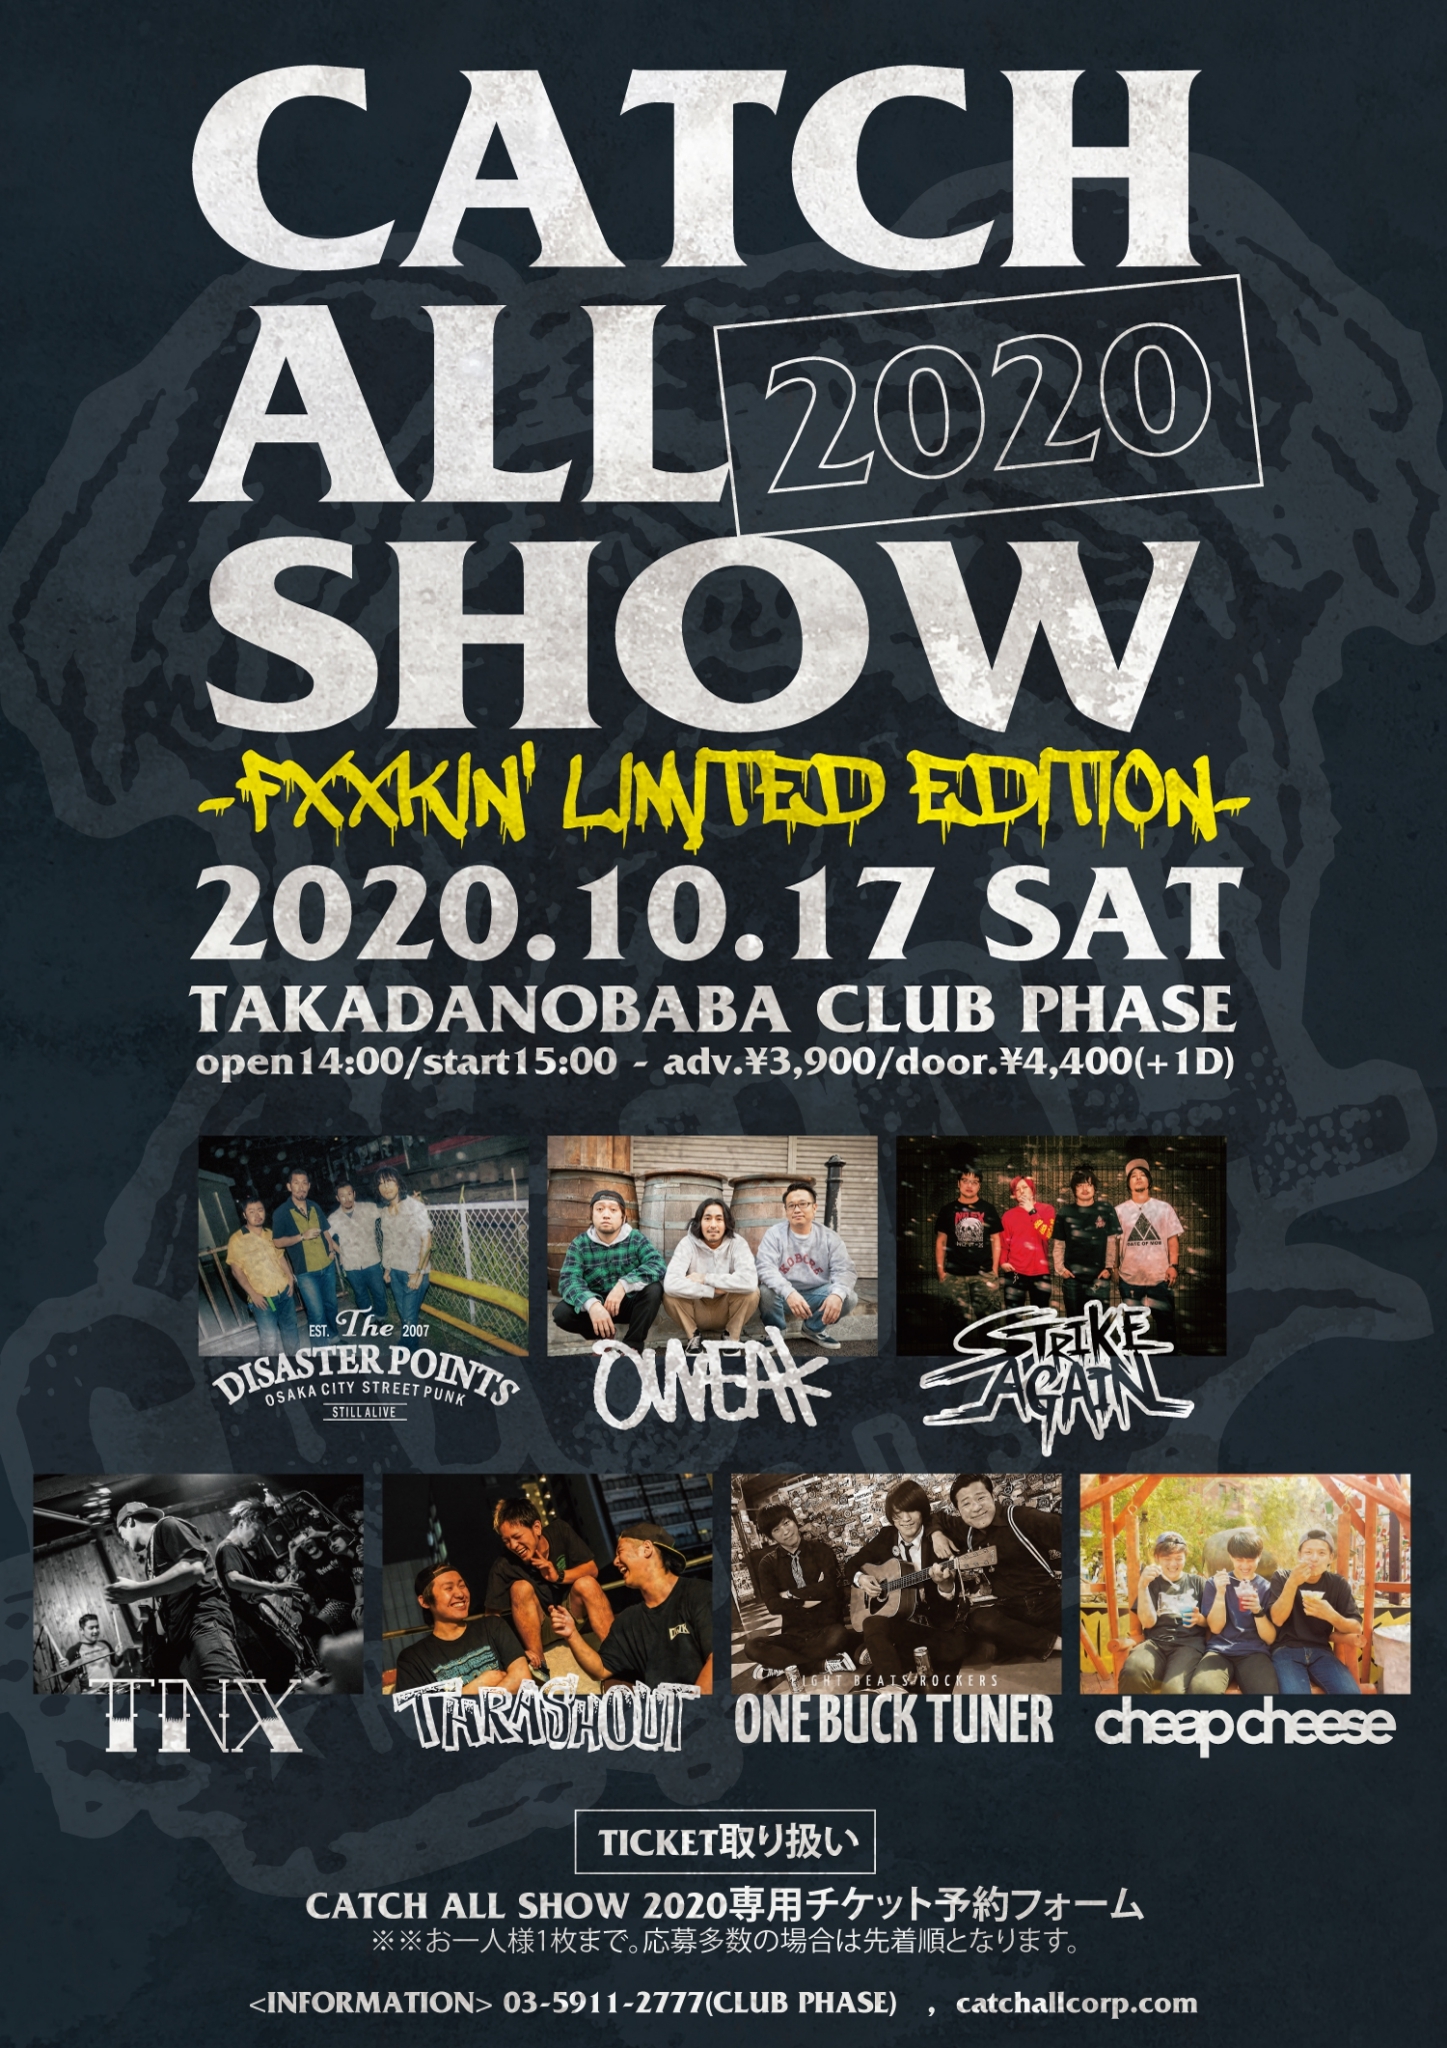 CATCH ALL SHOW 2020